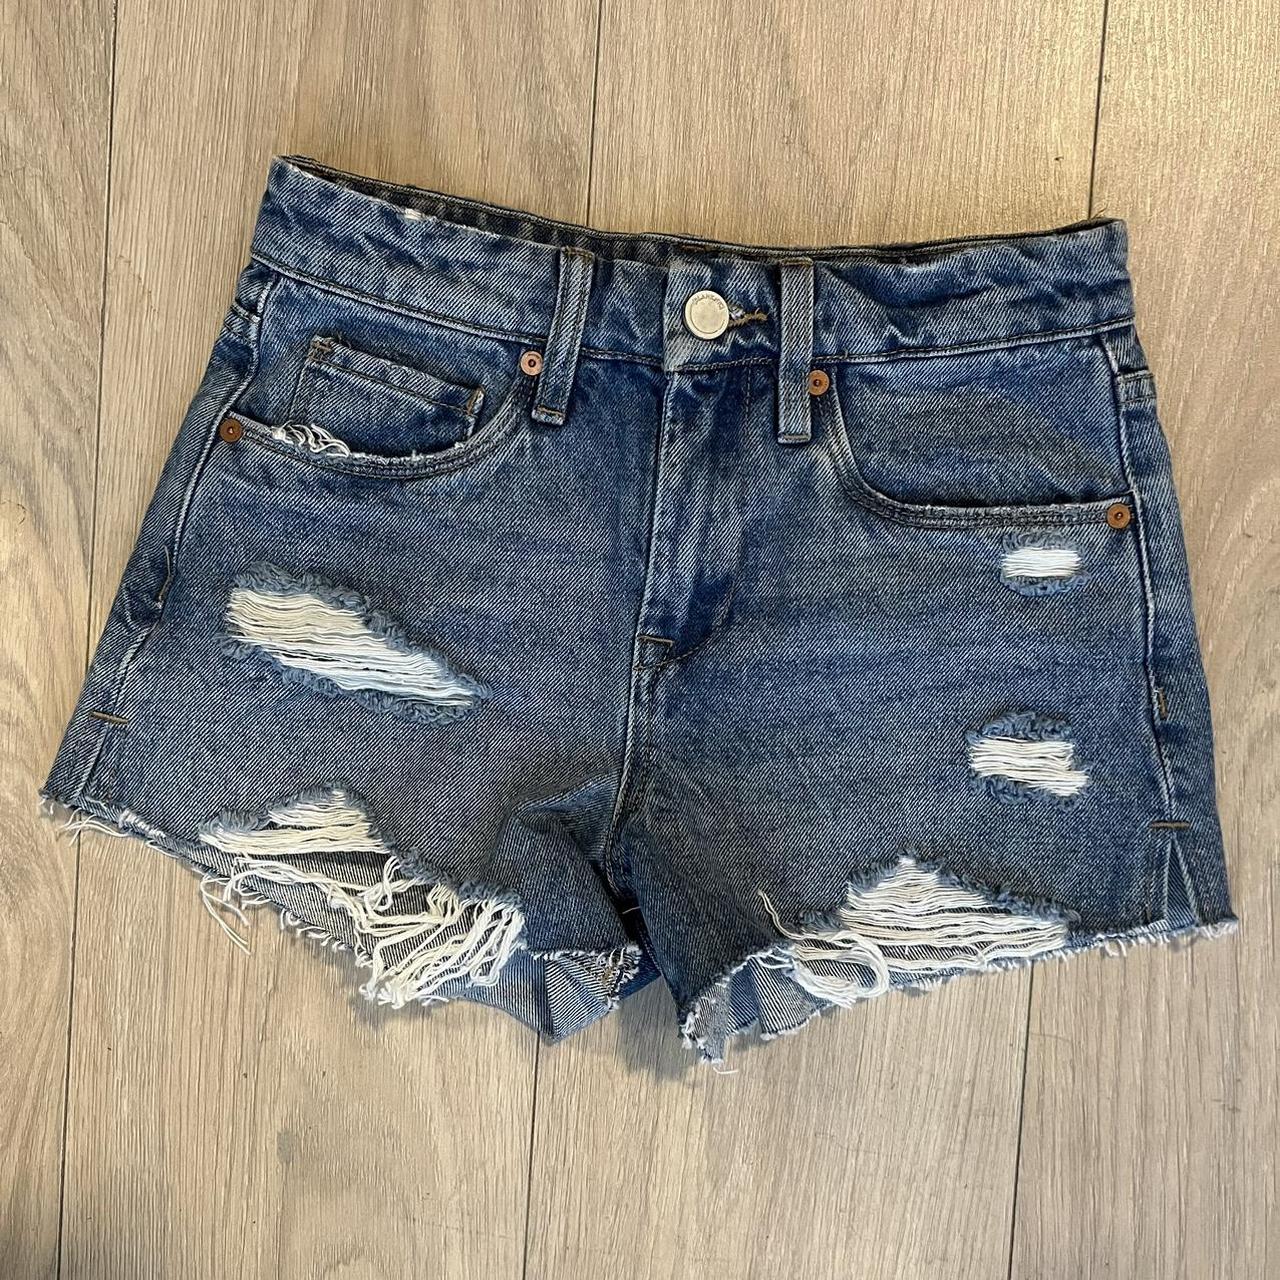 Blank NYC Women's Blue and Navy Shorts